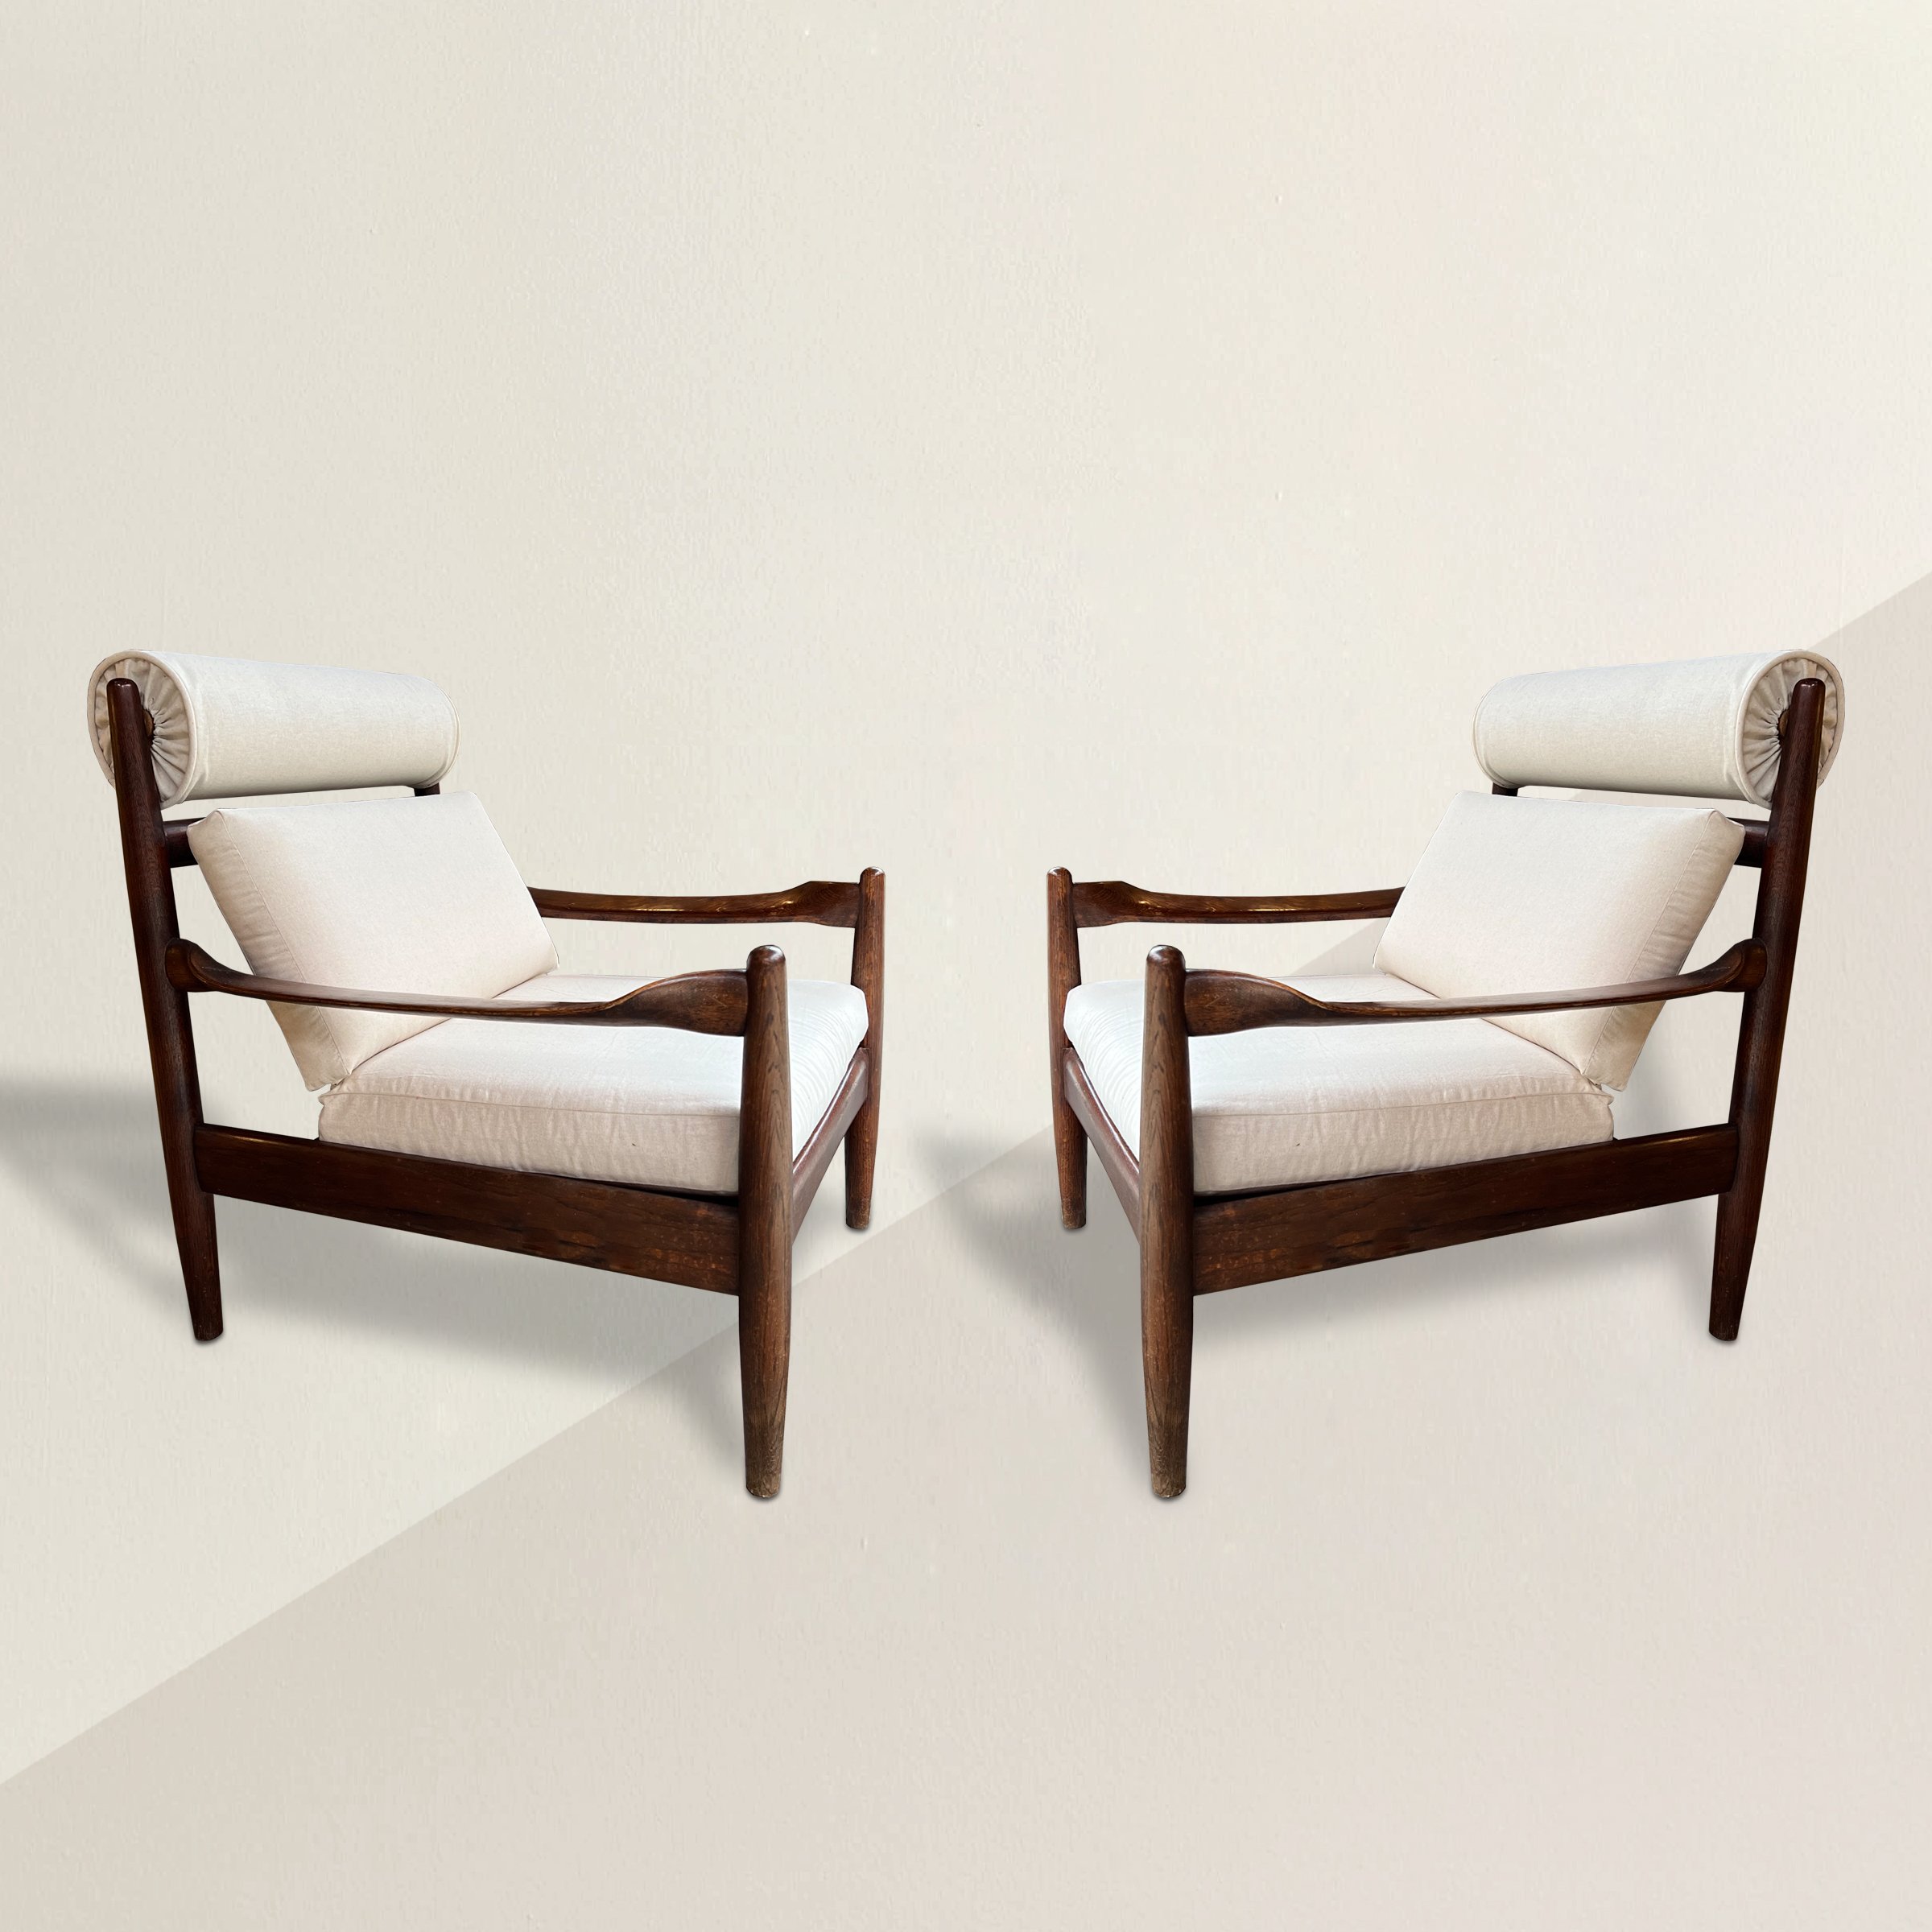 Pair of French Modern Chairs.jpg